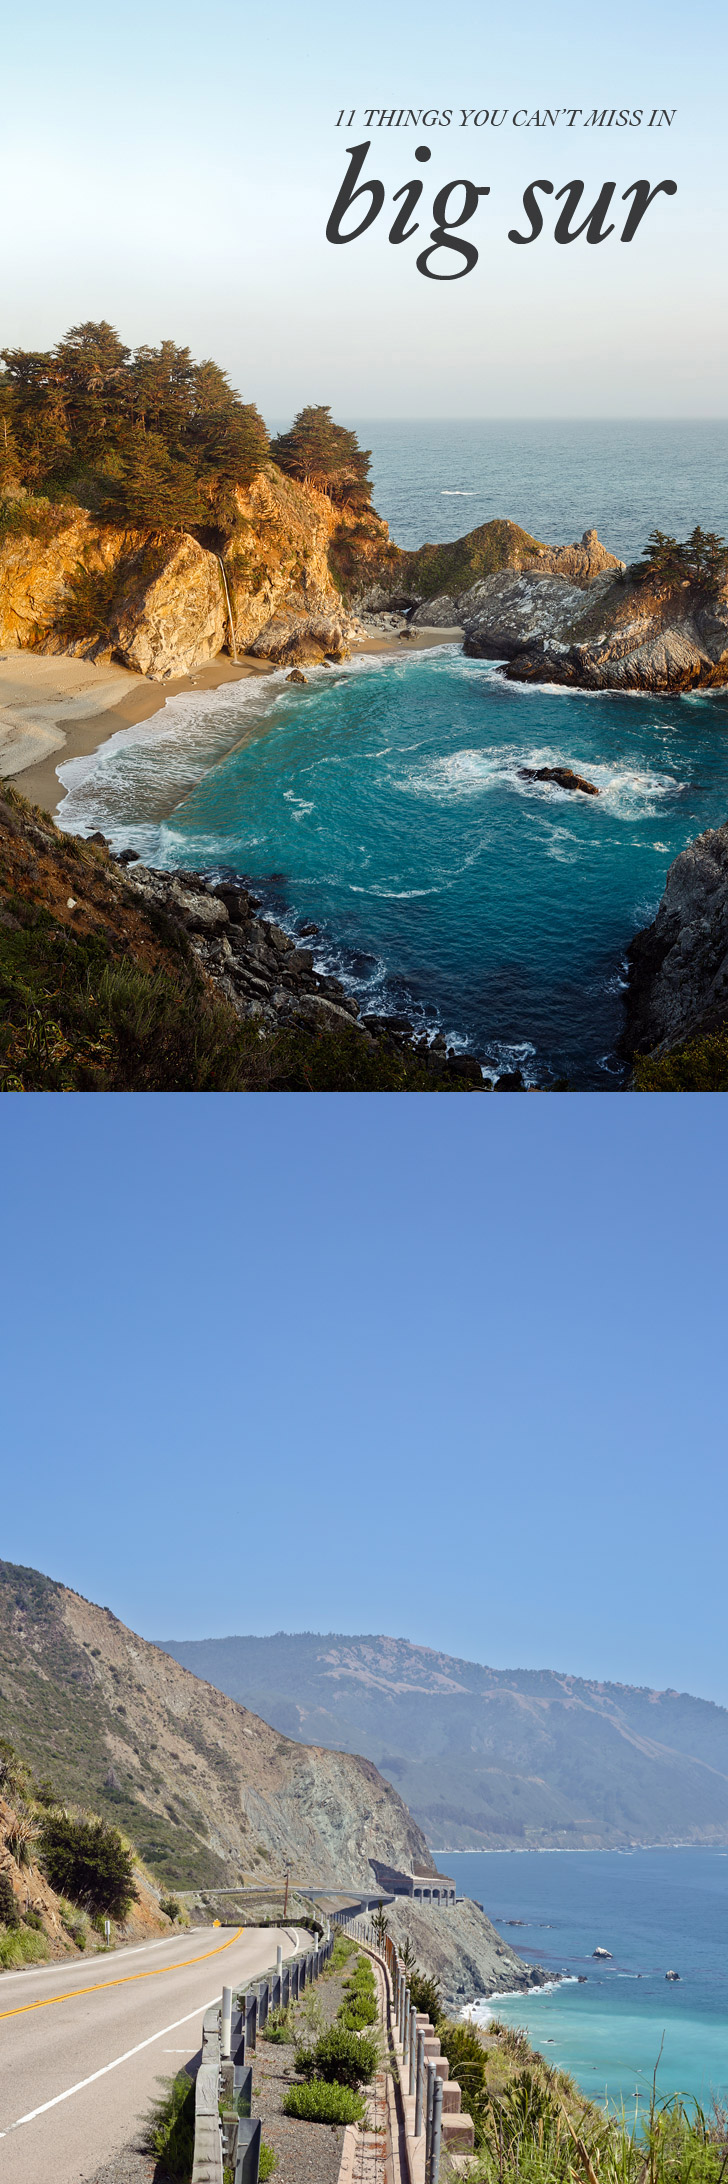 11 Things You Can't Miss in Big Sur California